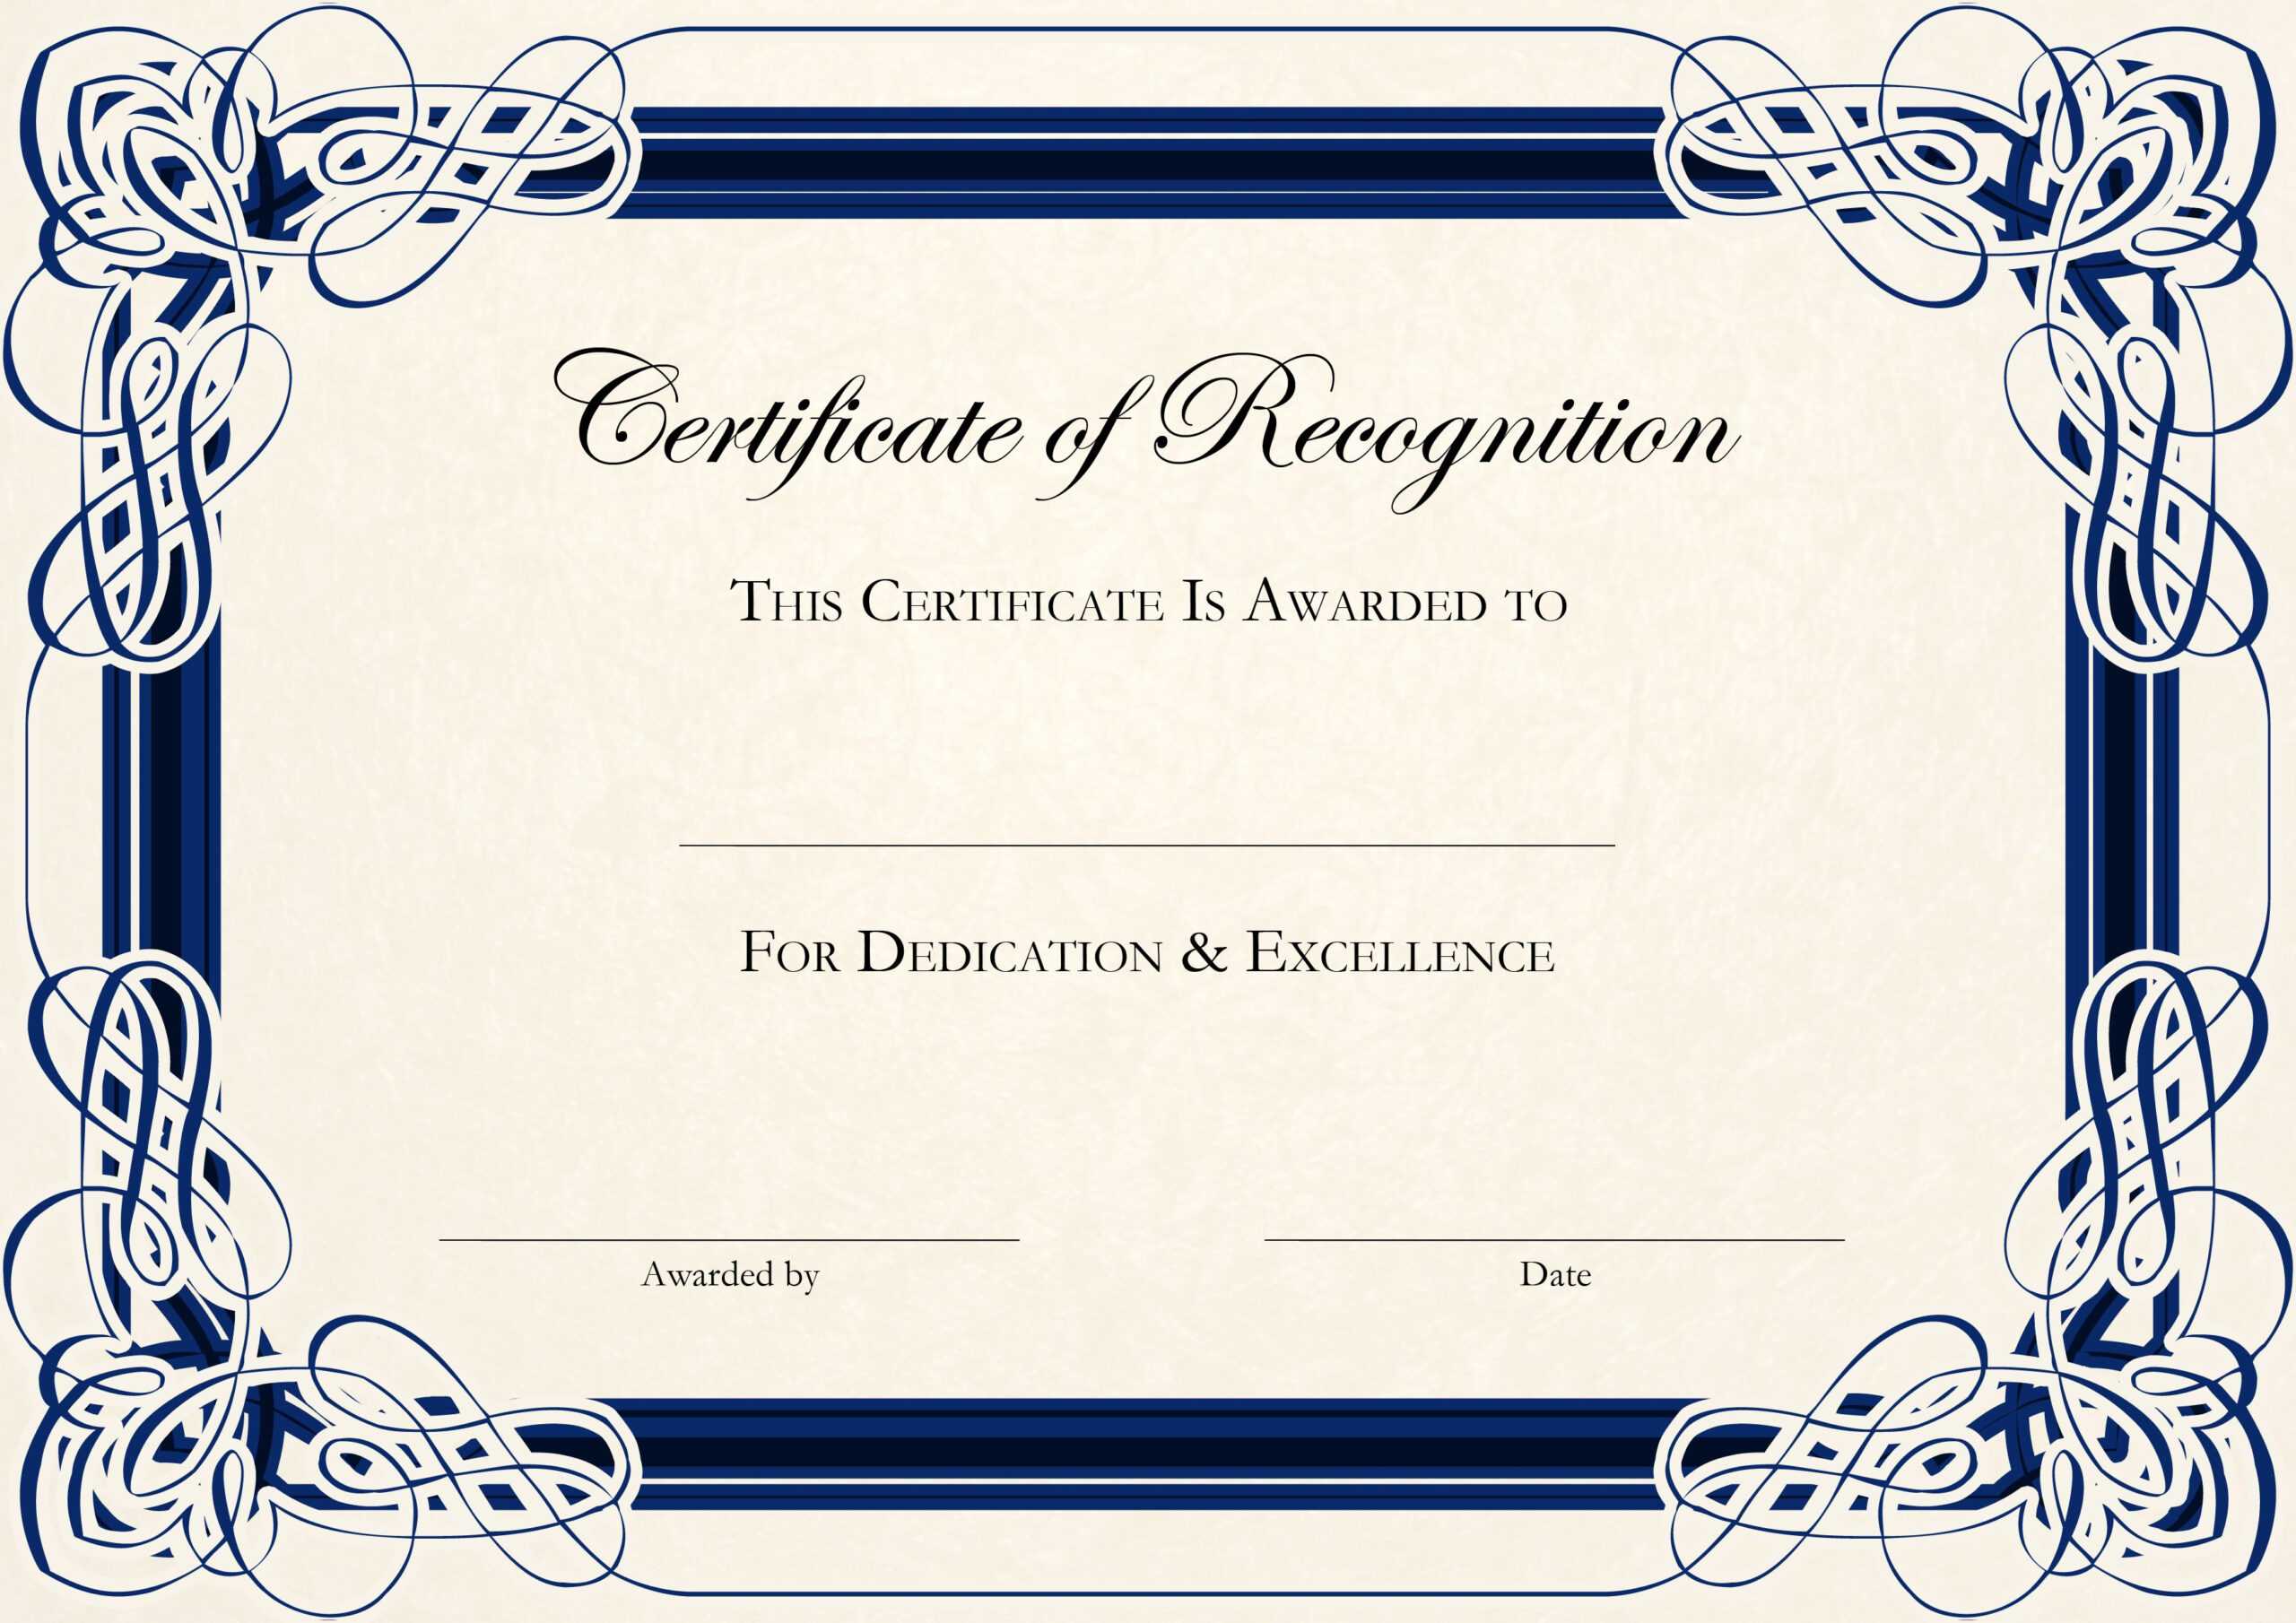 Sports Cetificate | Certificate Of Recognition A4 Thumbnail Regarding Template For Recognition Certificate